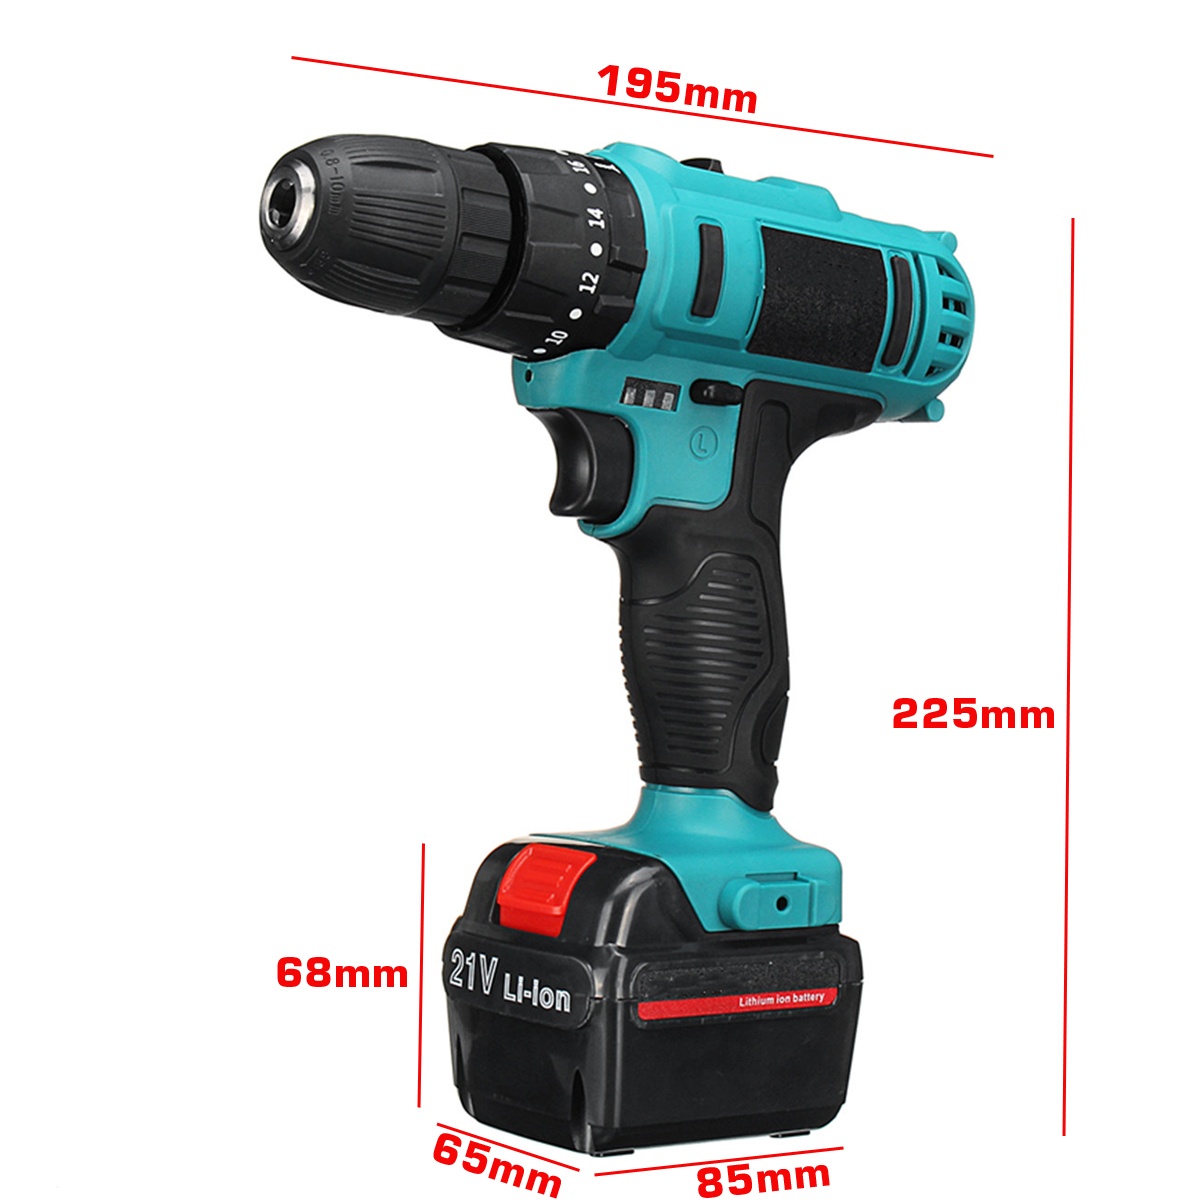 21V-Cordless-Impact-Power-Drill-Electric-Screwdriver-Set-with-2-Li-ion-Batteries-1372018-9